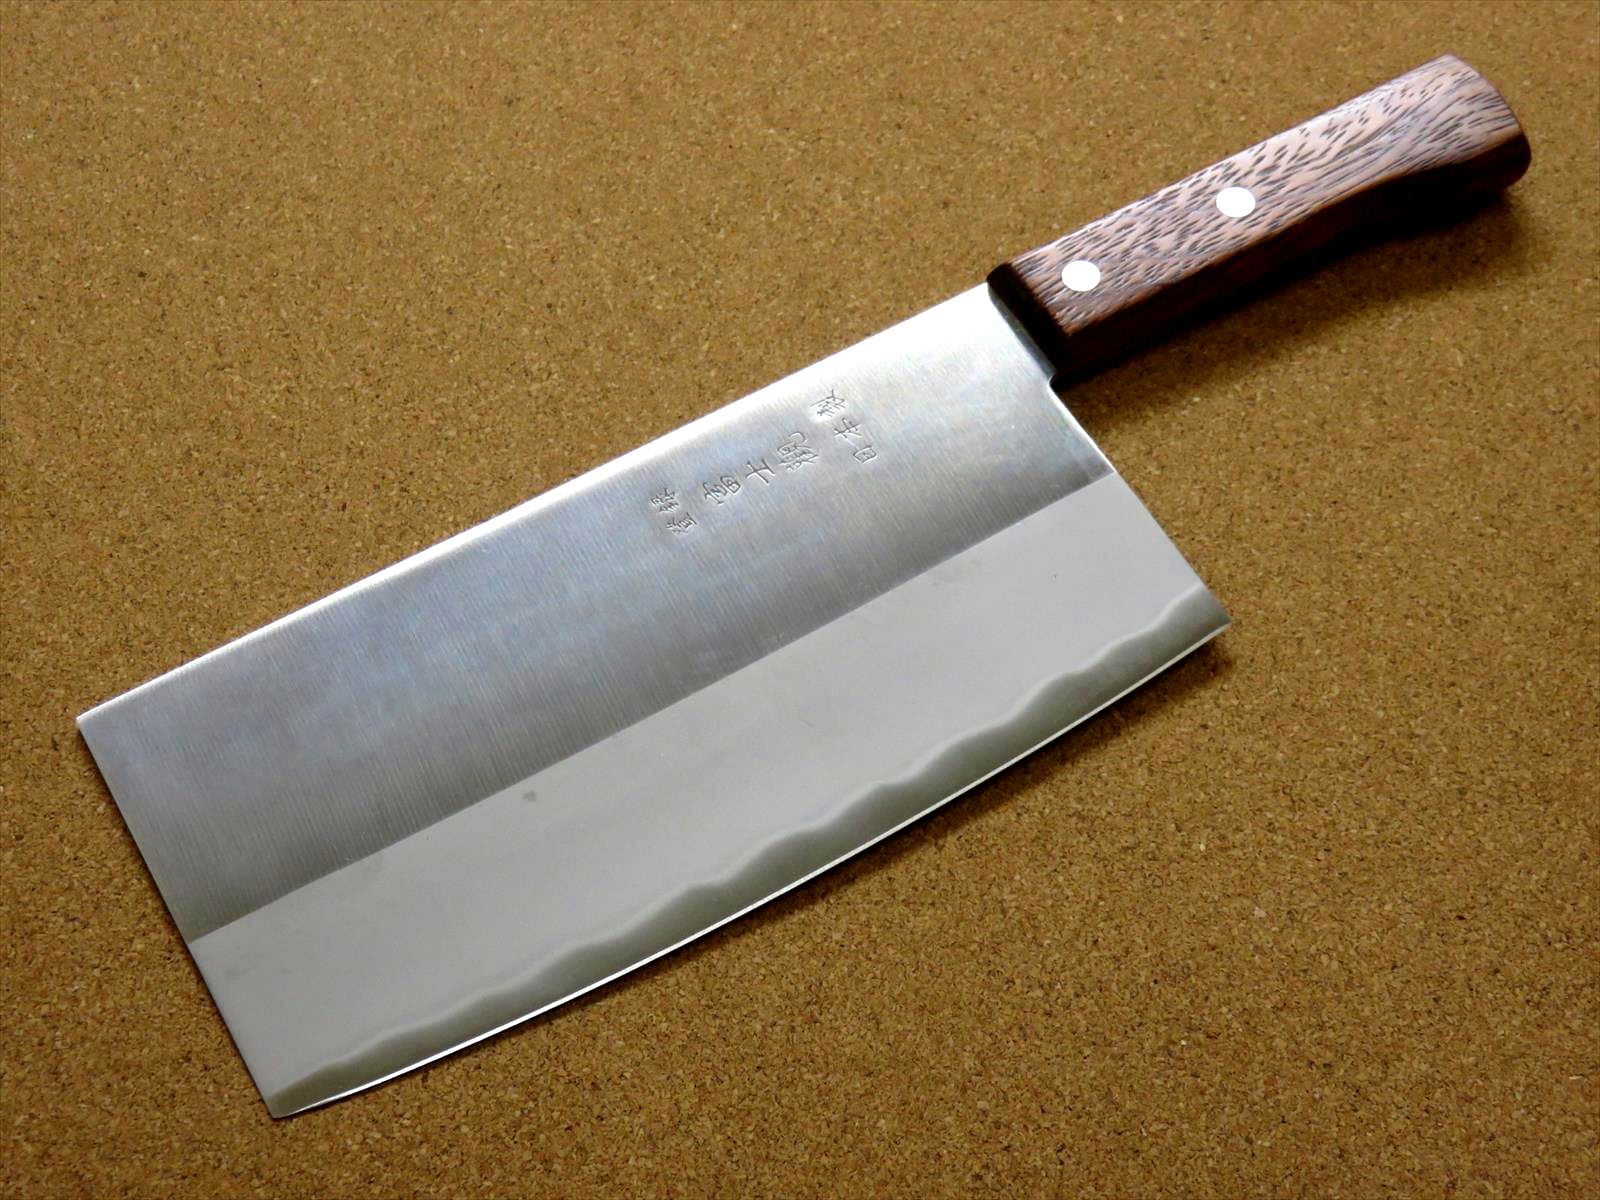 Crude - Chinese Vegetable Cleaver Knife, 7 inch,Carbon Steel, Super Thin &  Light